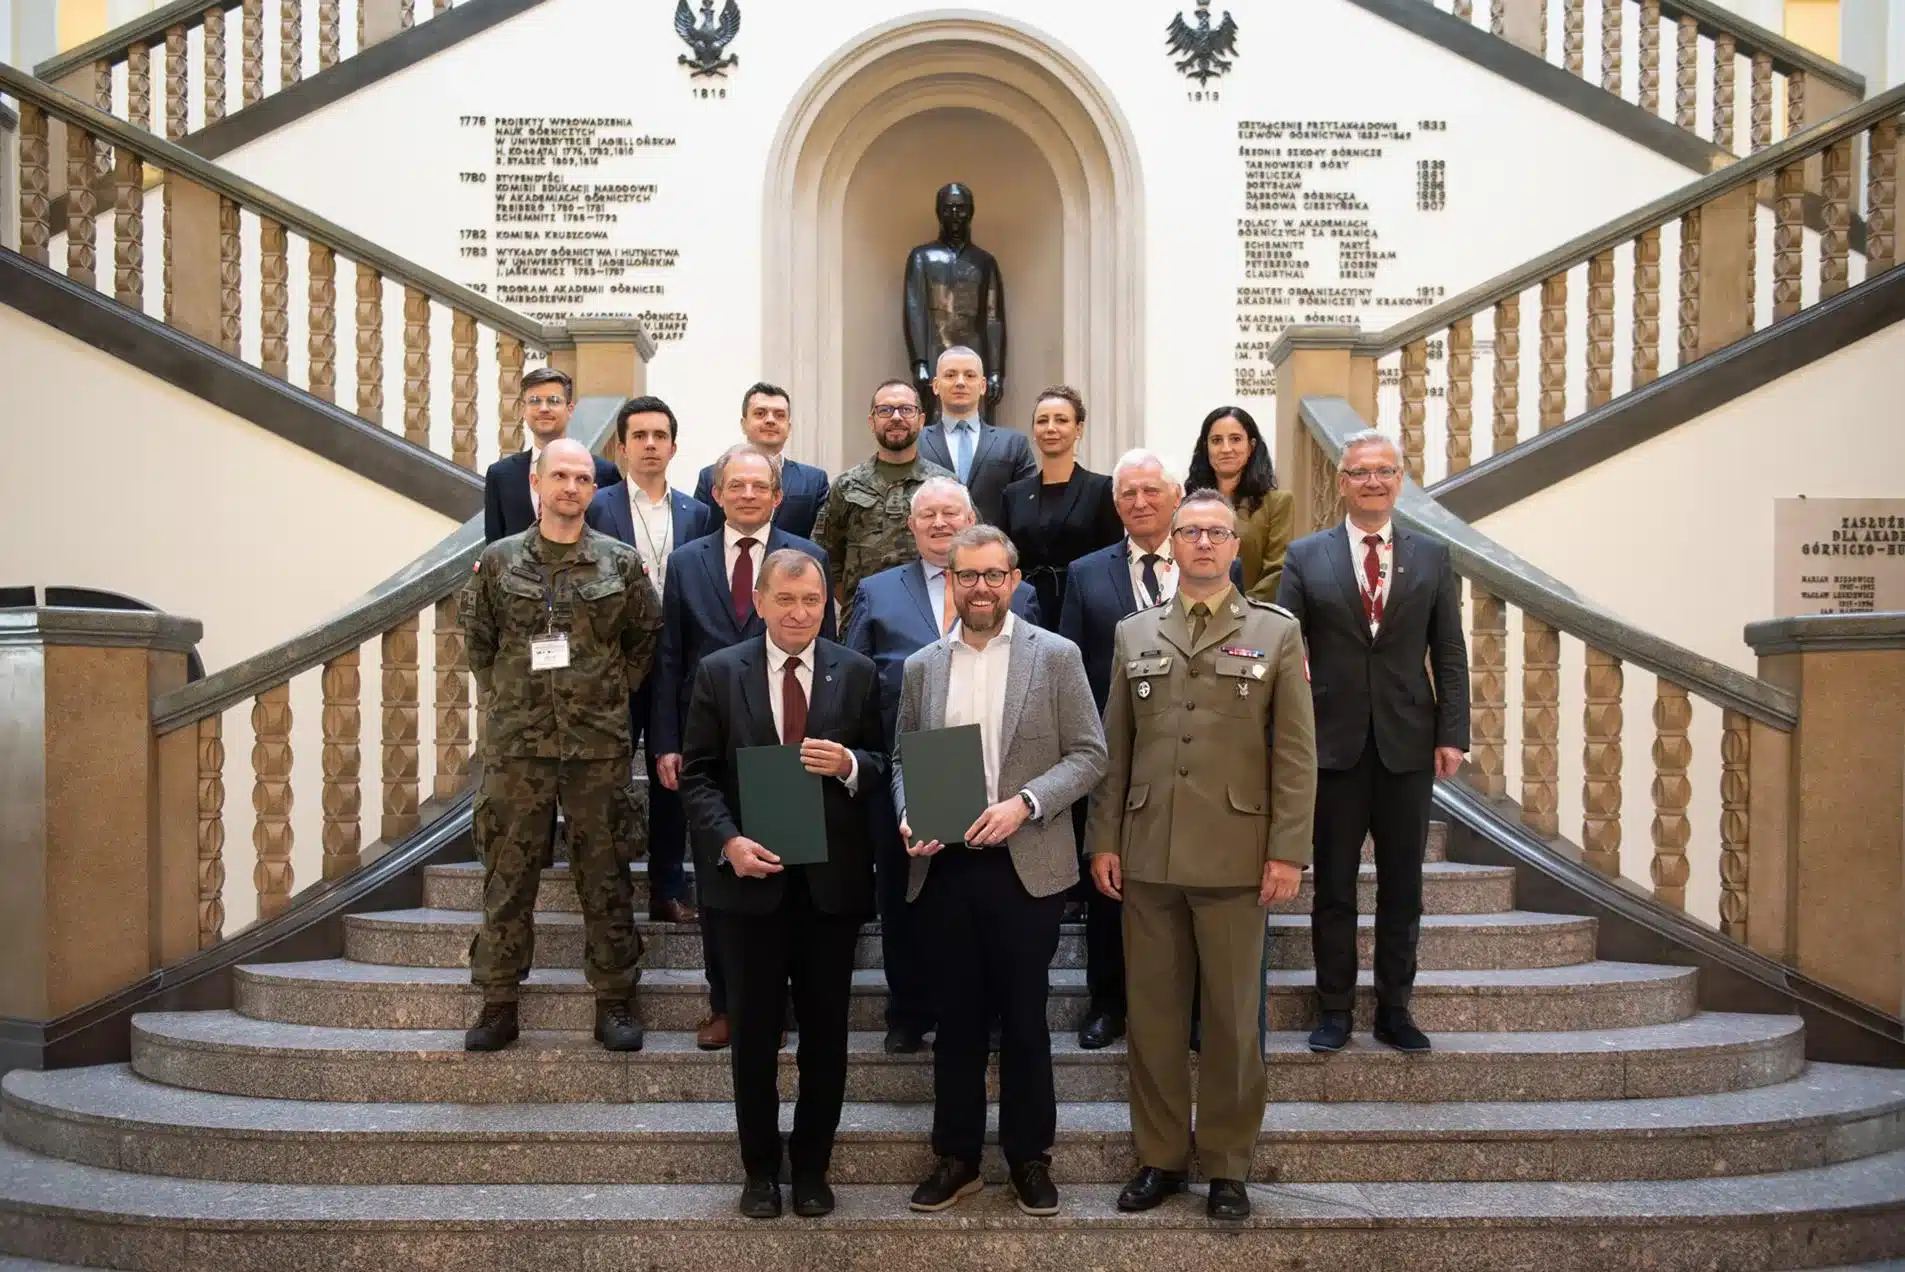 AGH – NATO DIANA Agreement, photo by AGH in Krakow